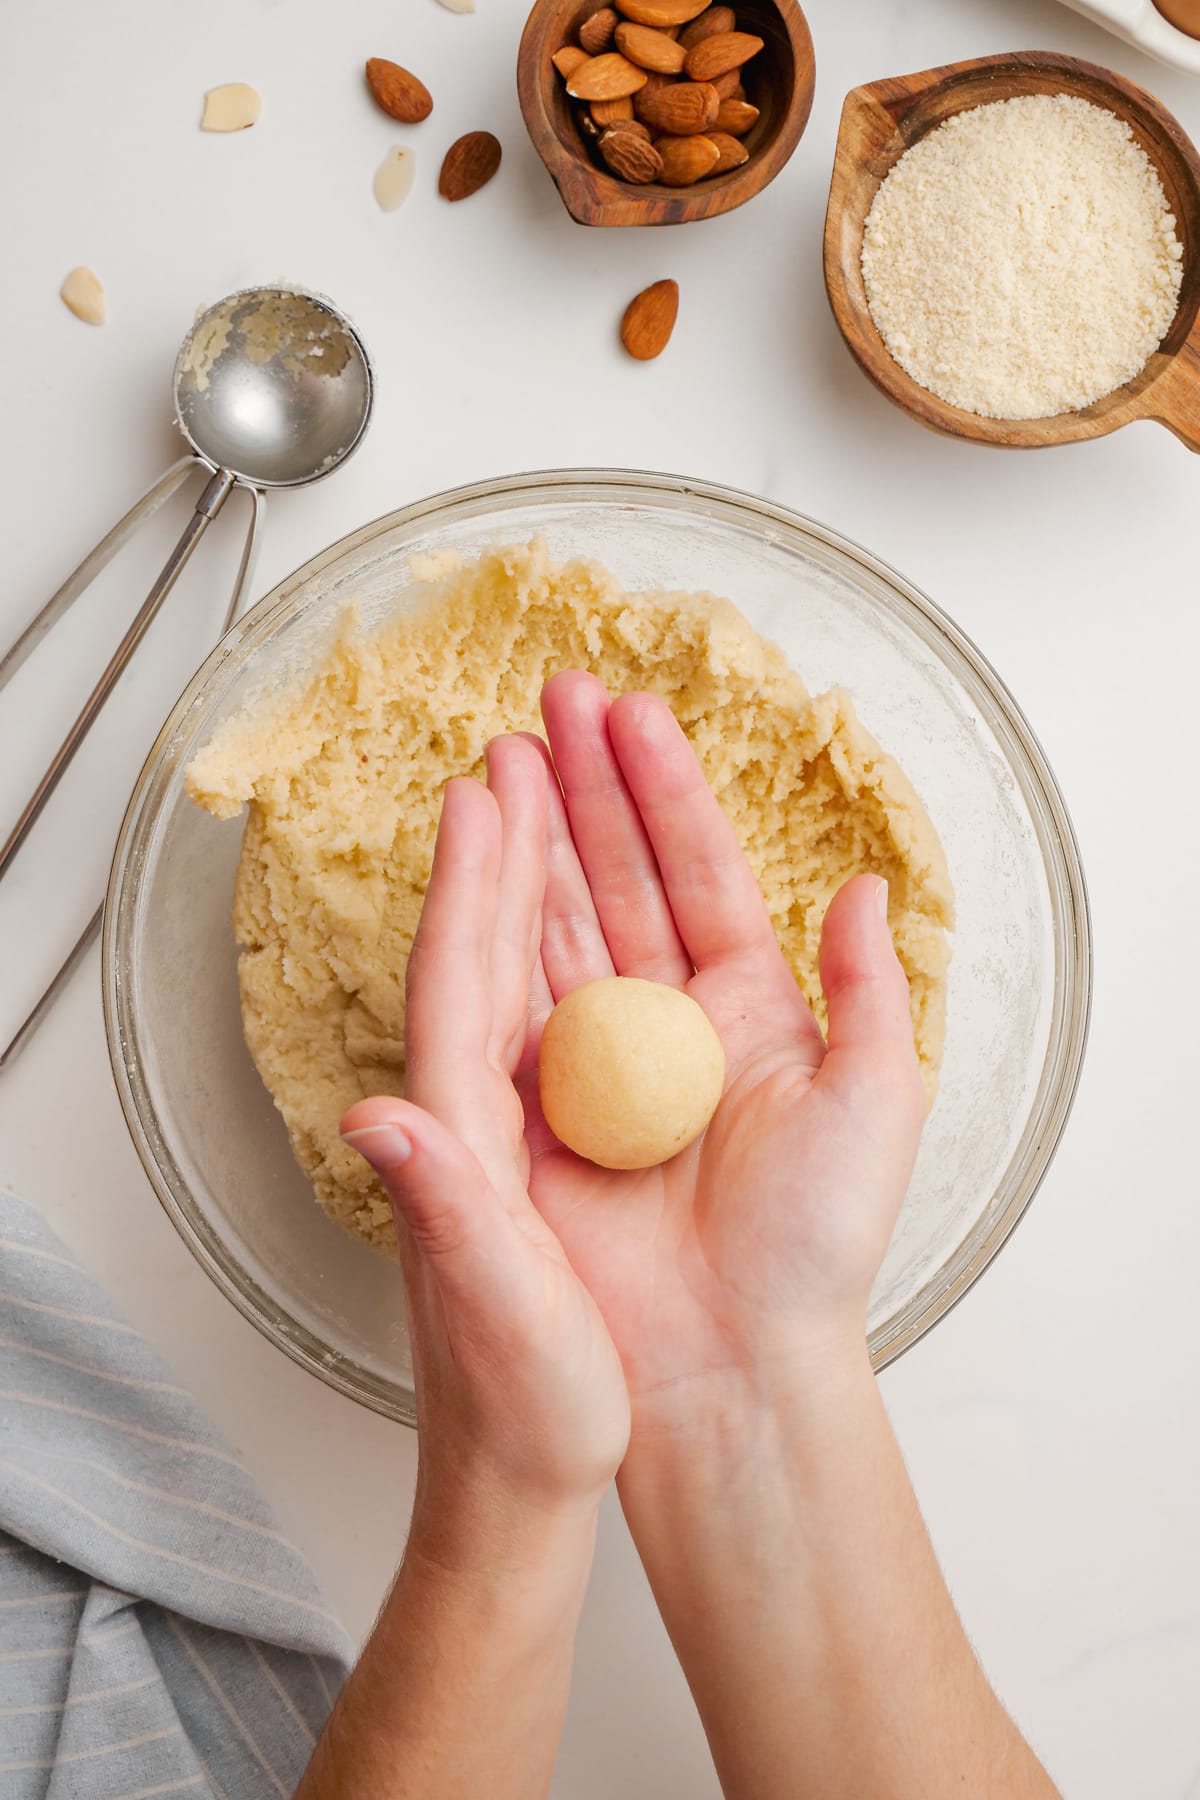 amaretti cookies dough, woman's hands rolling into ball